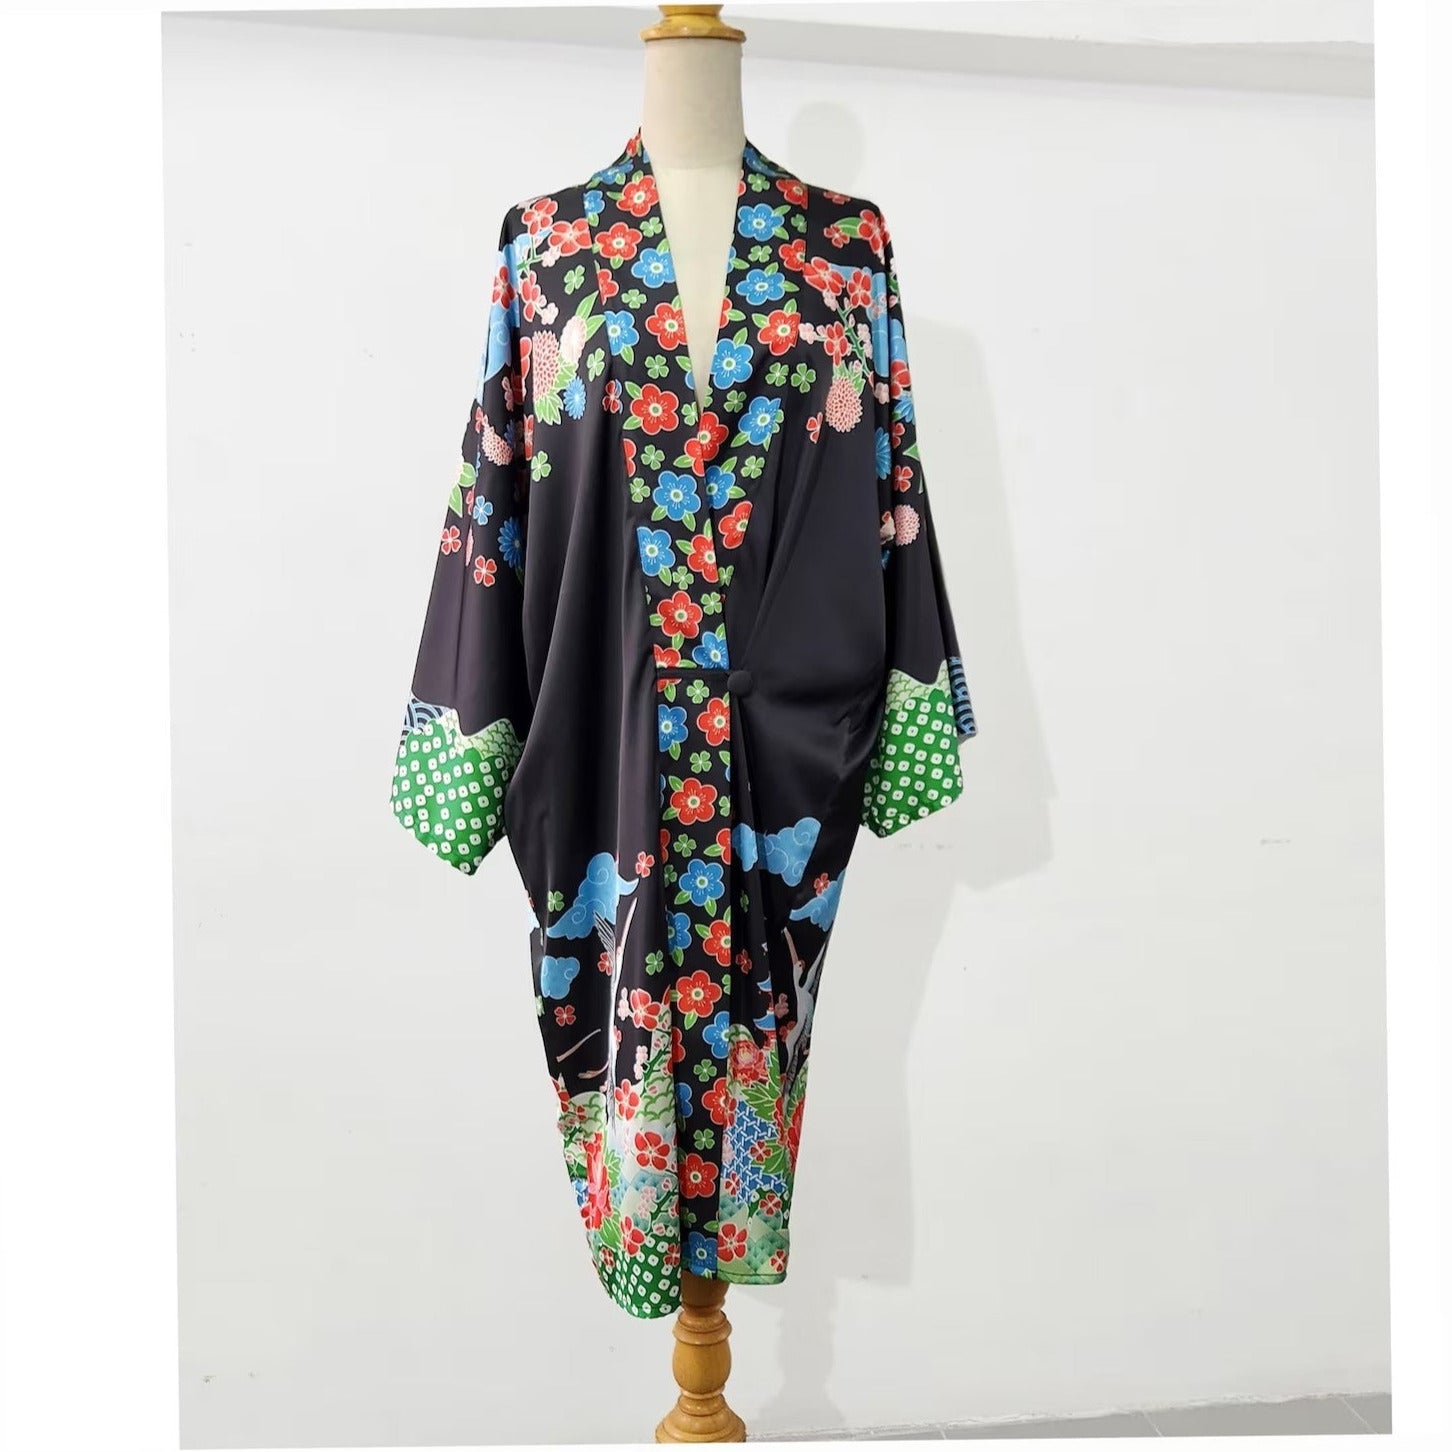 Japanese art inspired kimono robe in black with floral and bird print, a 1920s-inspired kimono robe